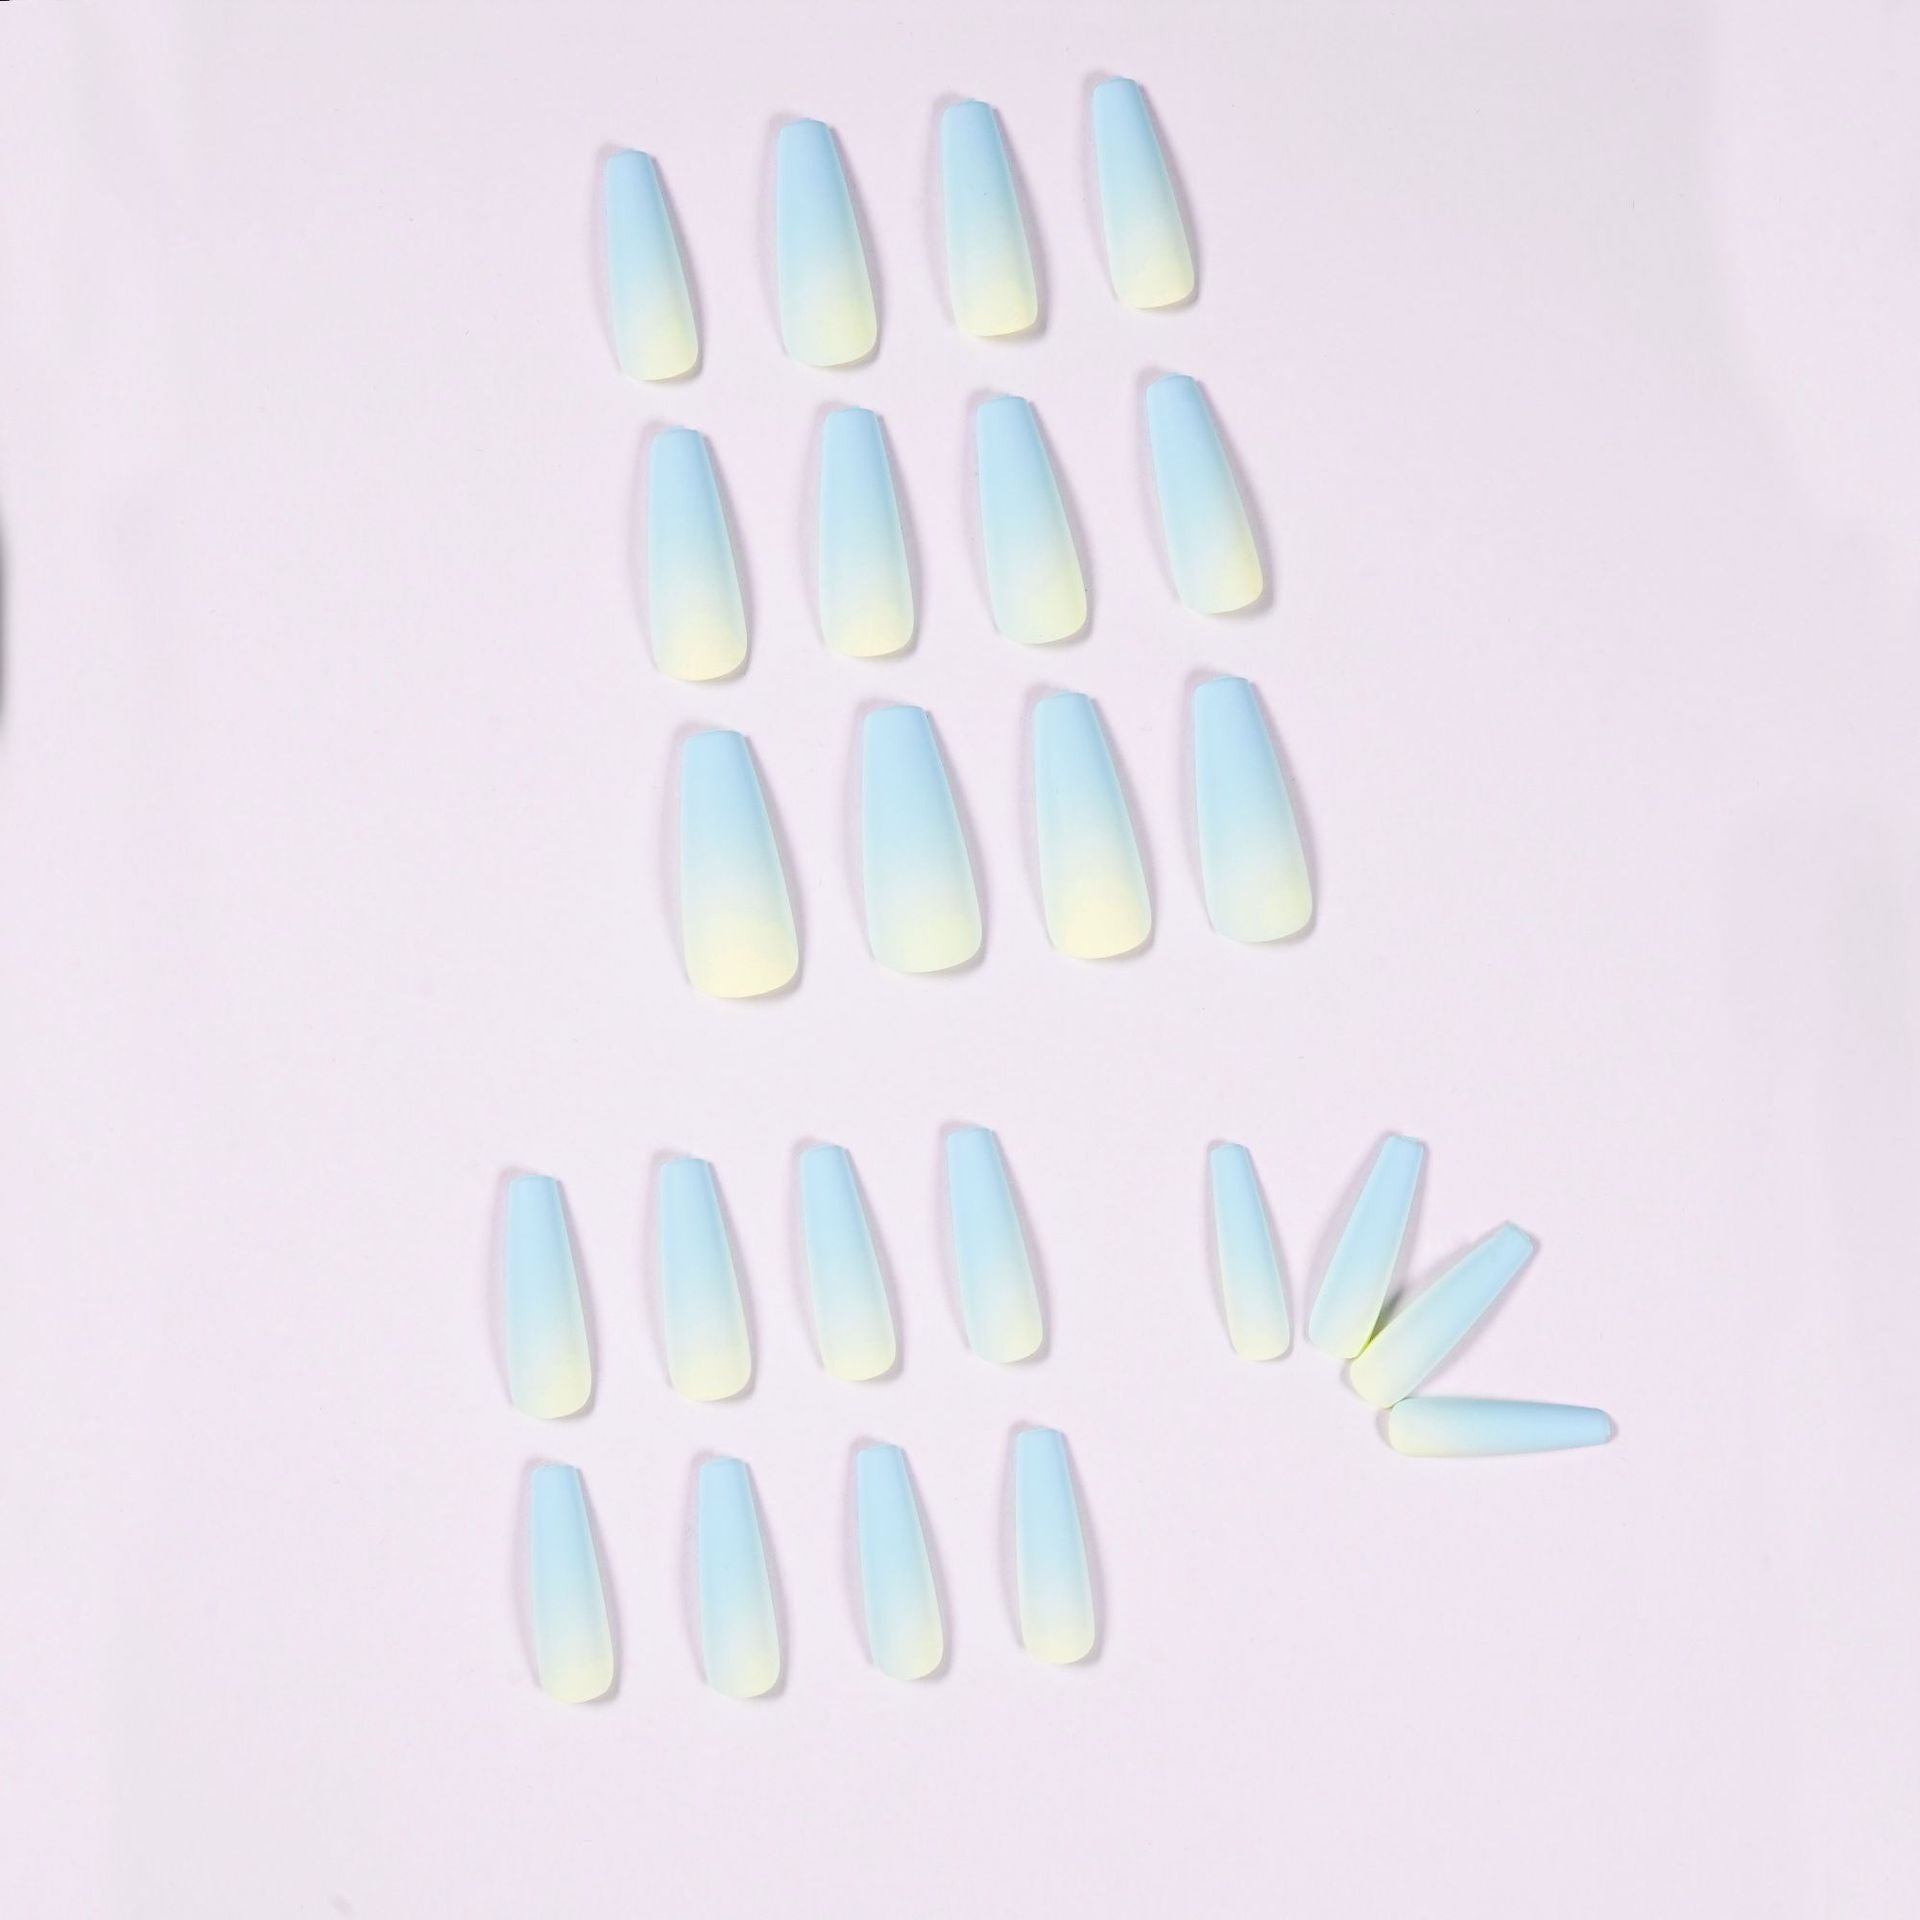 blue ombre nails 70305300 lying on white background